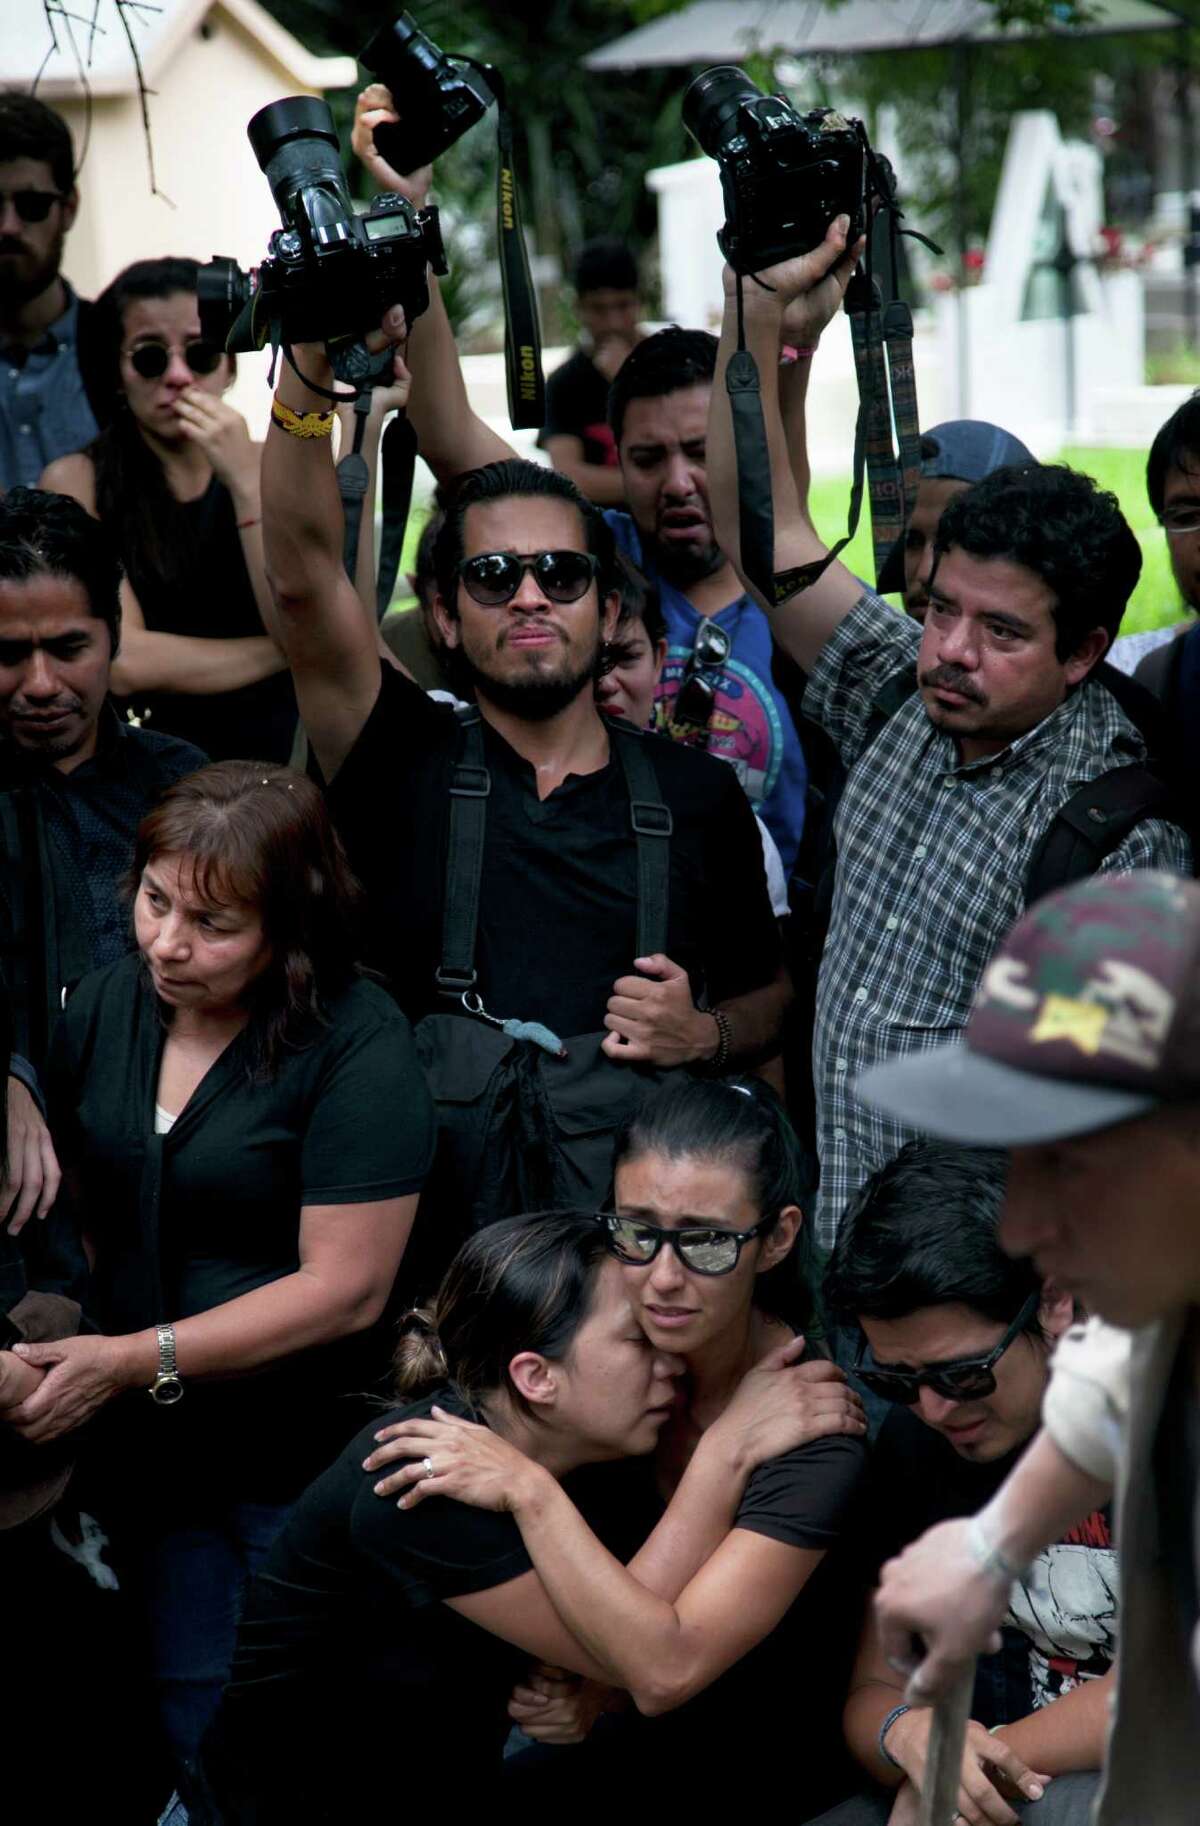 Family and friends mourn during the funeral of murdered photojournalist Ruben Espinosa in Mexico City, Monday, Aug. 3, 2015. With an investigation barely underway, Mexican journalist protection groups are already expressing fears that authorities won't consider Espinosa's brutal killing as being related to his work - even though he fled the state he covered fearing for his safety. Espinosa, 31, worked for the investigative magazine Proceso and other media in Veracruz state. (AP Photo/Marco Ugarte)